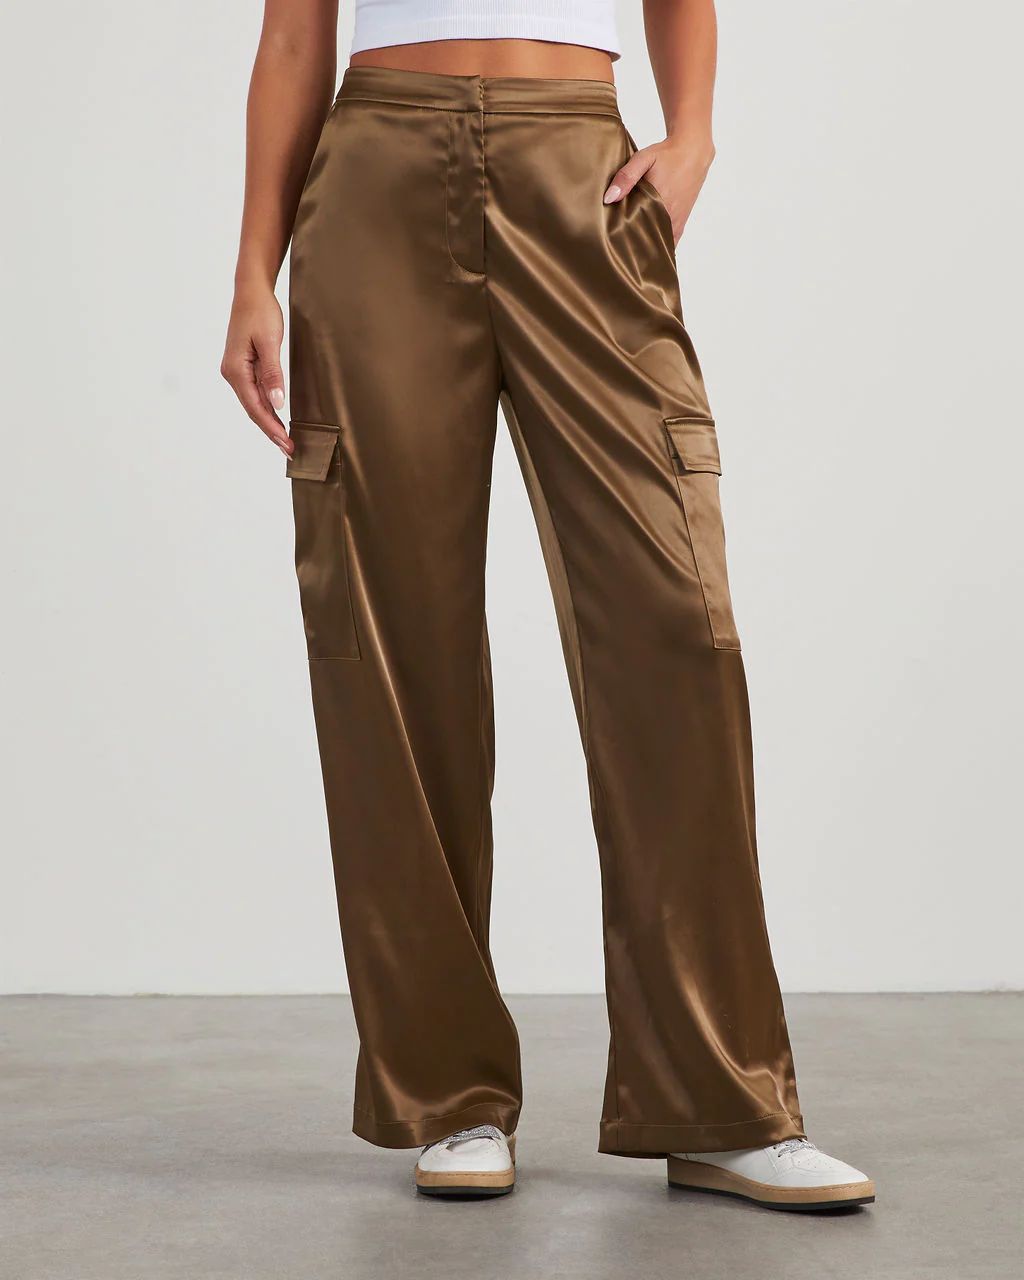 Adriano Satin Cargo Pants | VICI Collection